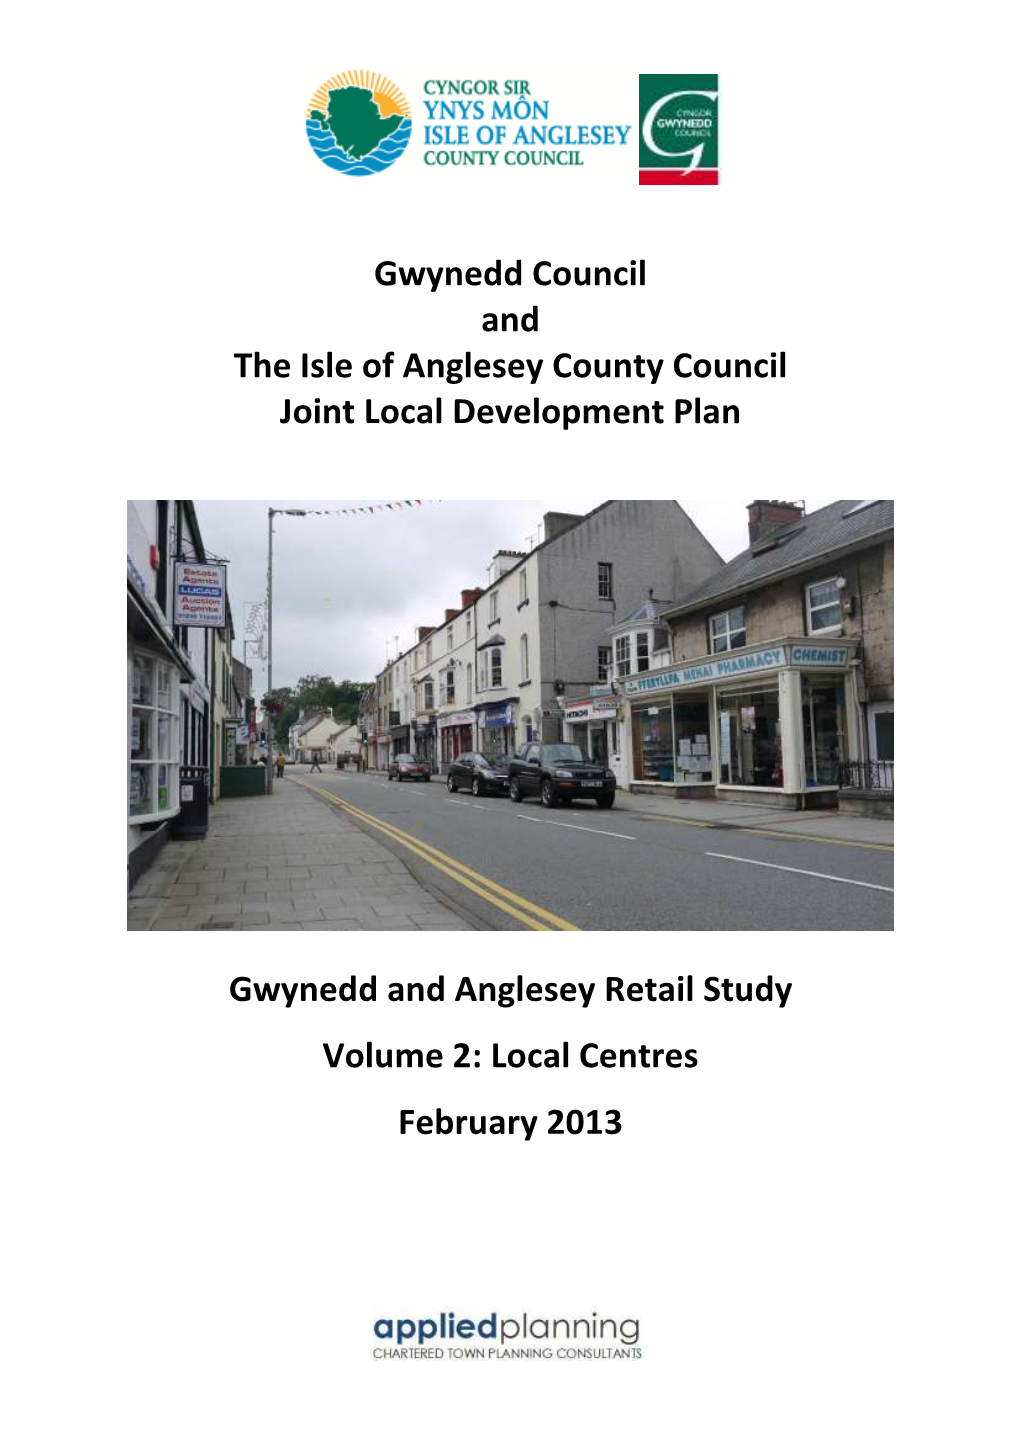 Gwynedd Council and the Isle of Anglesey County Council Joint Local Development Plan Gwynedd and Anglesey Retail Study Volume 2